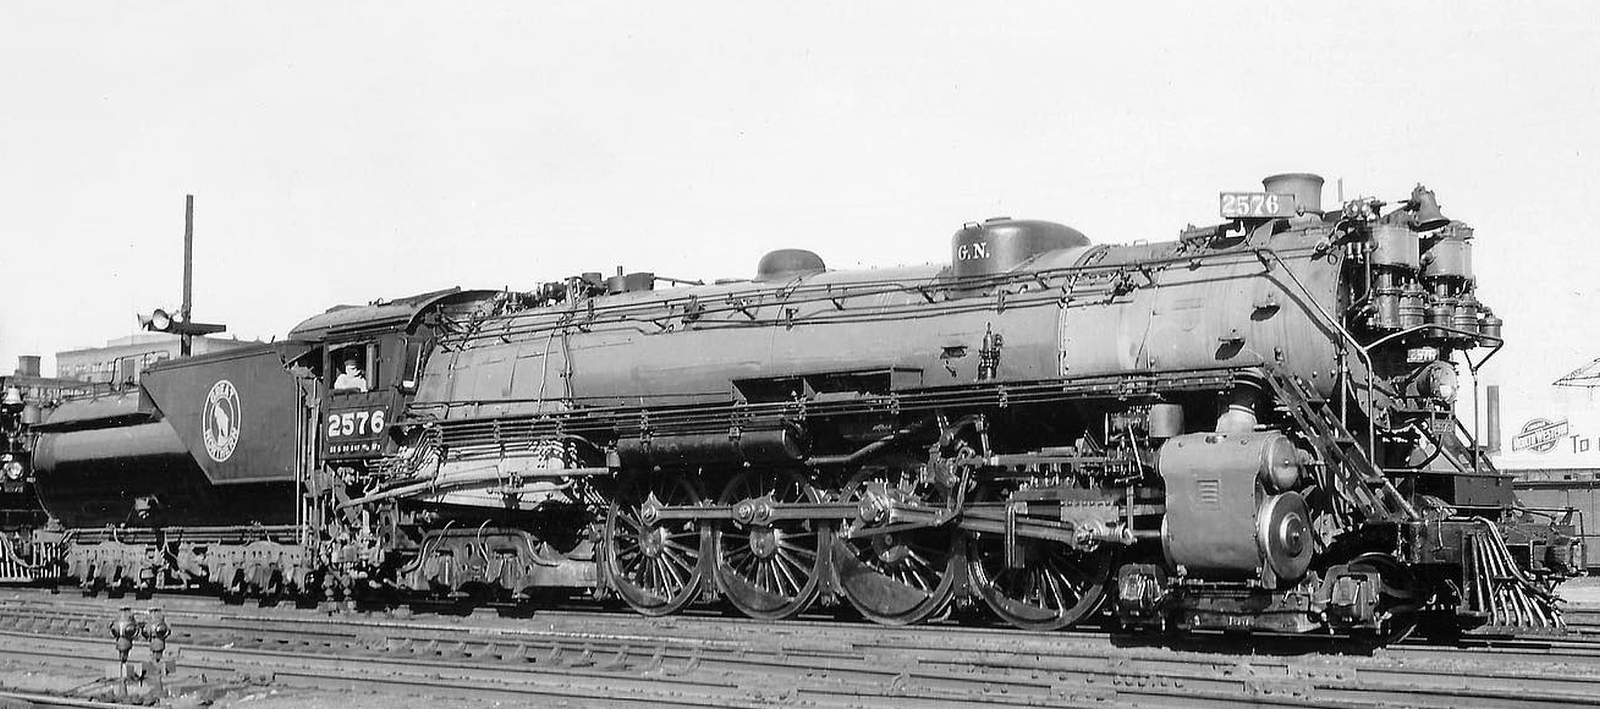 No. 2576 in front of 2579 im September 1946 in St. Paul, Minnesota